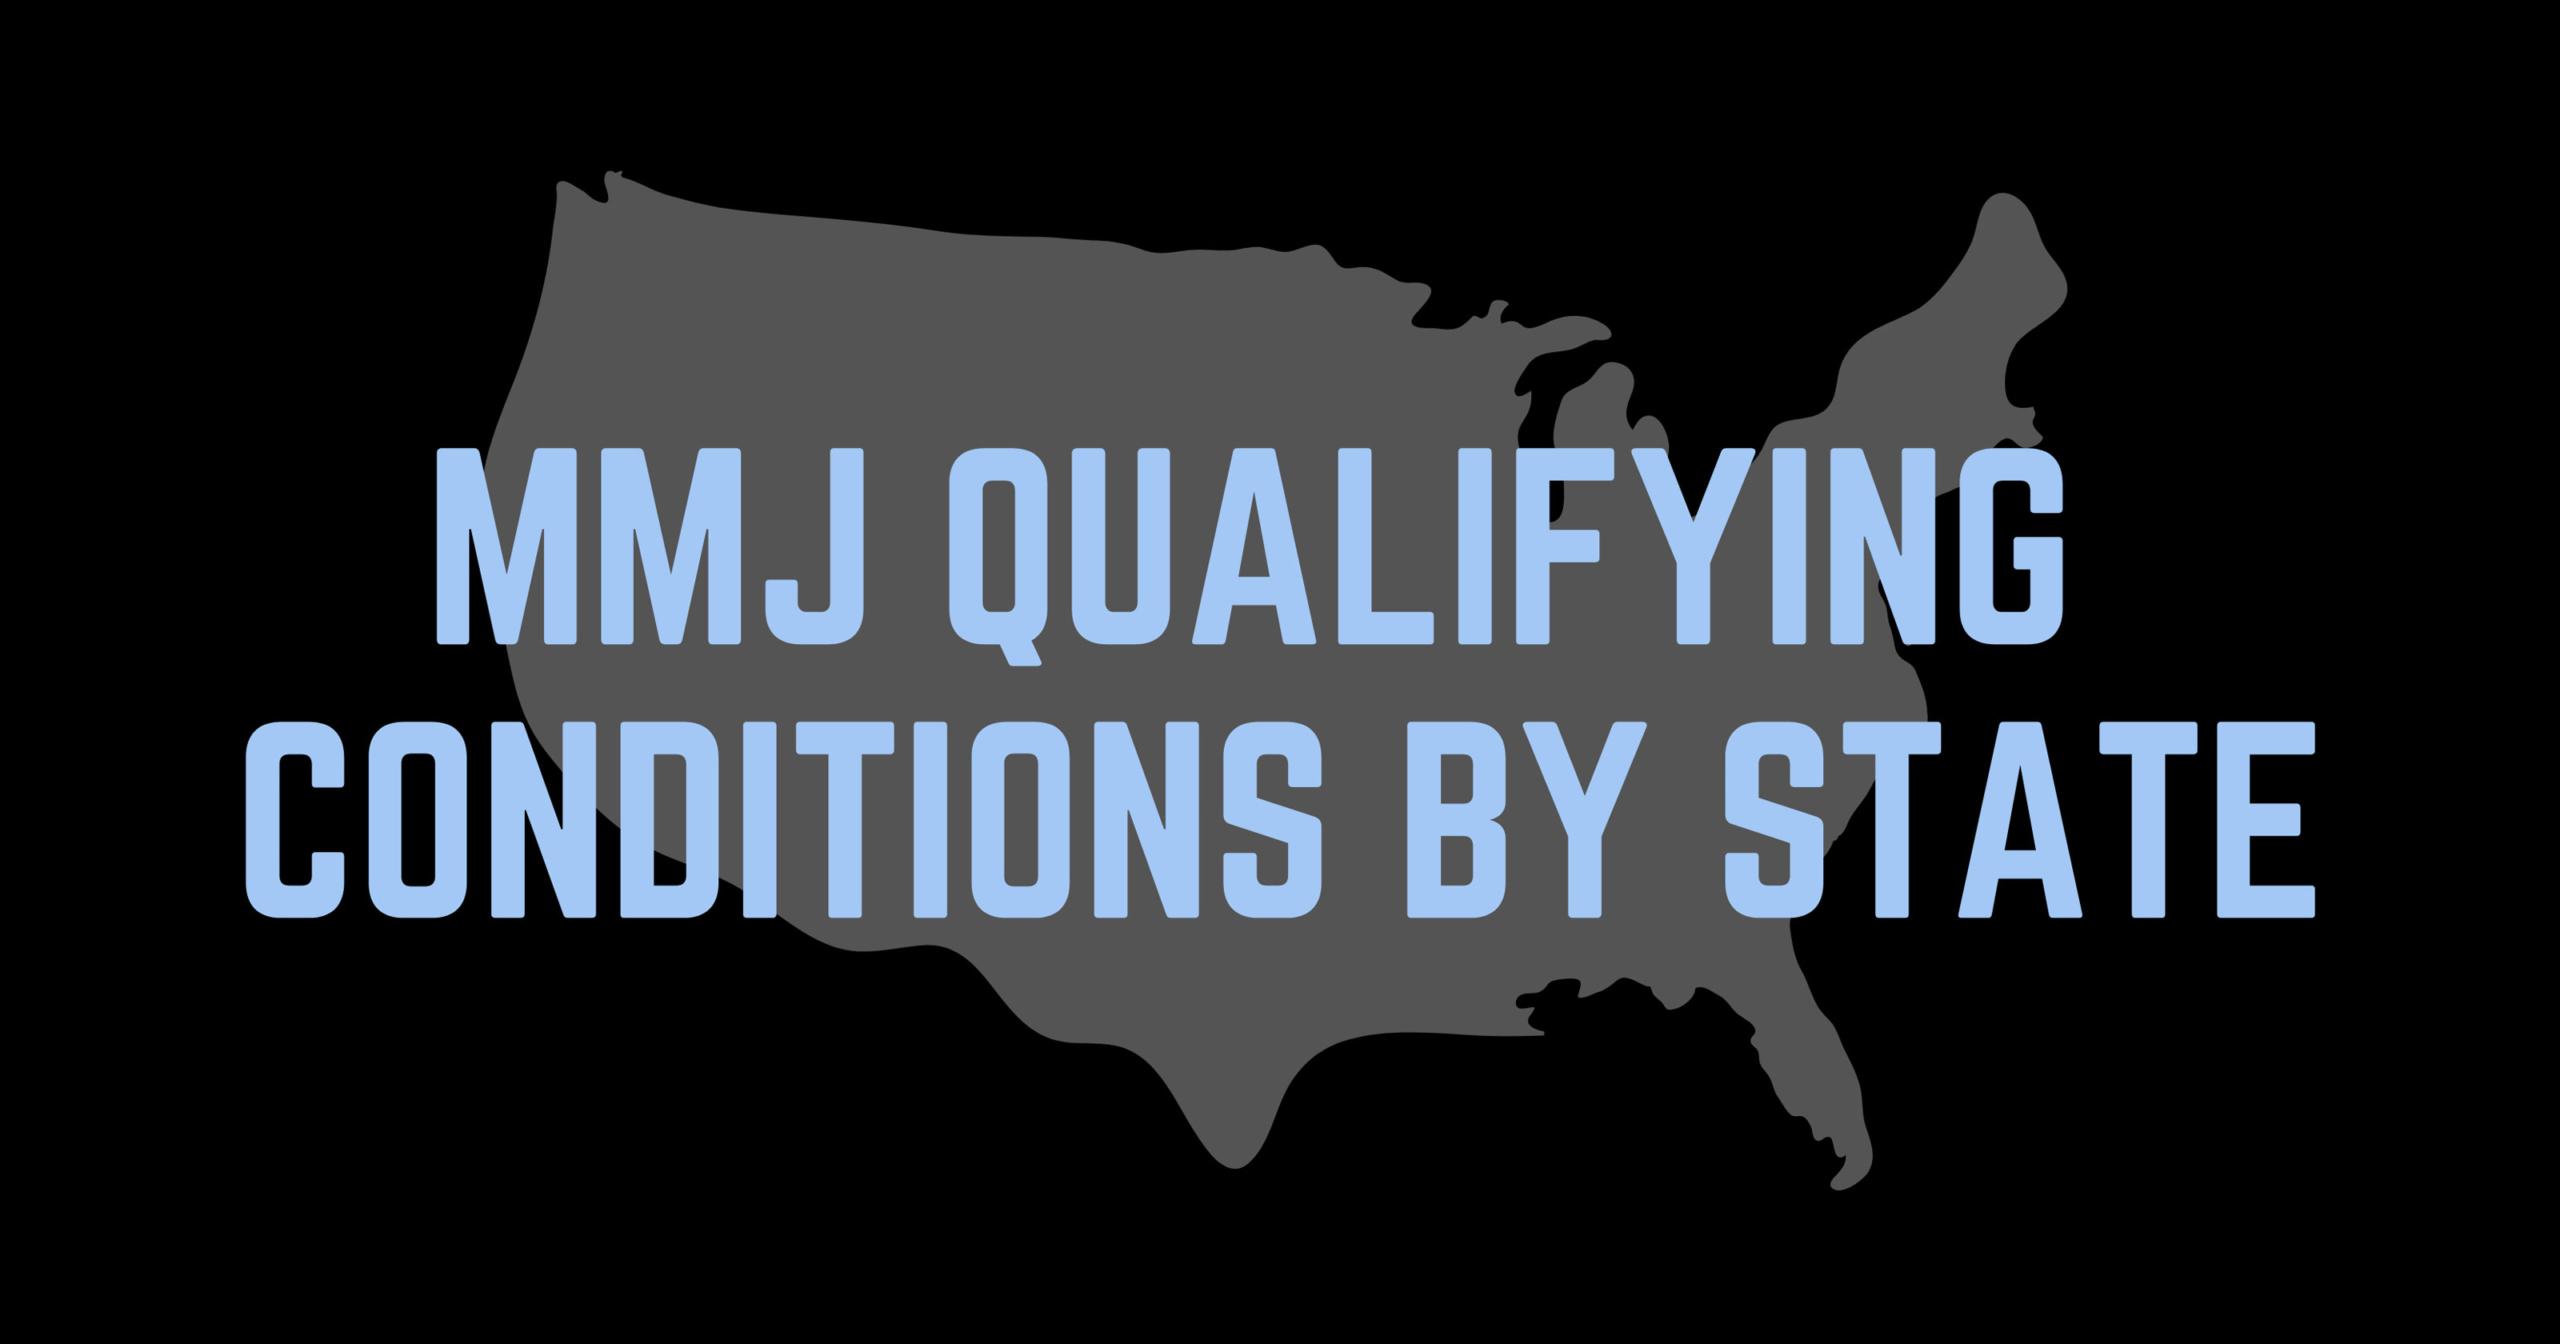 MMJ Qualifying Conditions by State